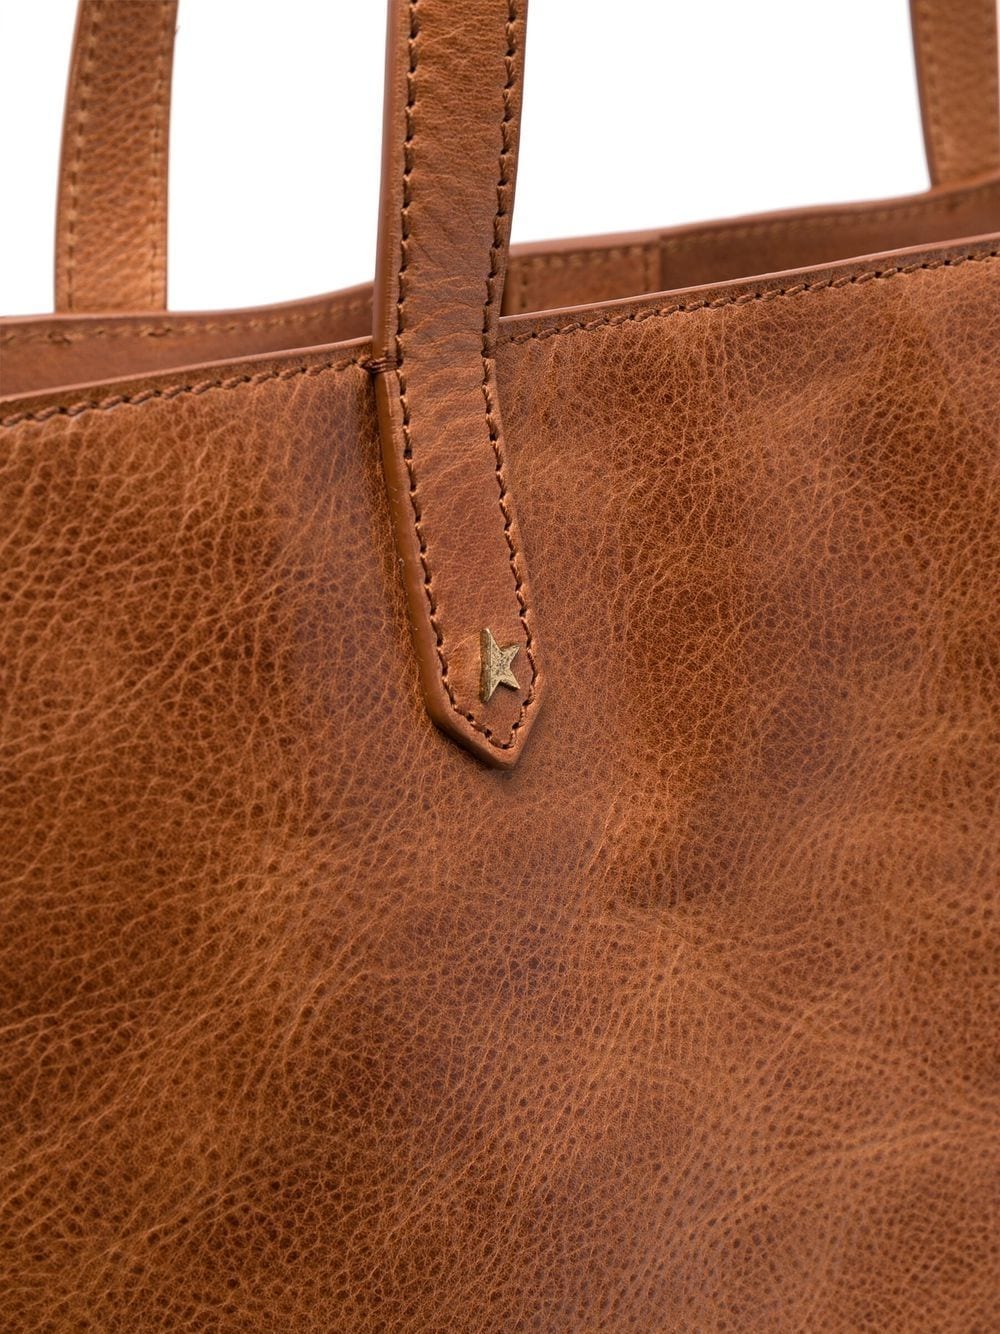 Golden Goose logo-stamp Leather Tote - Farfetch